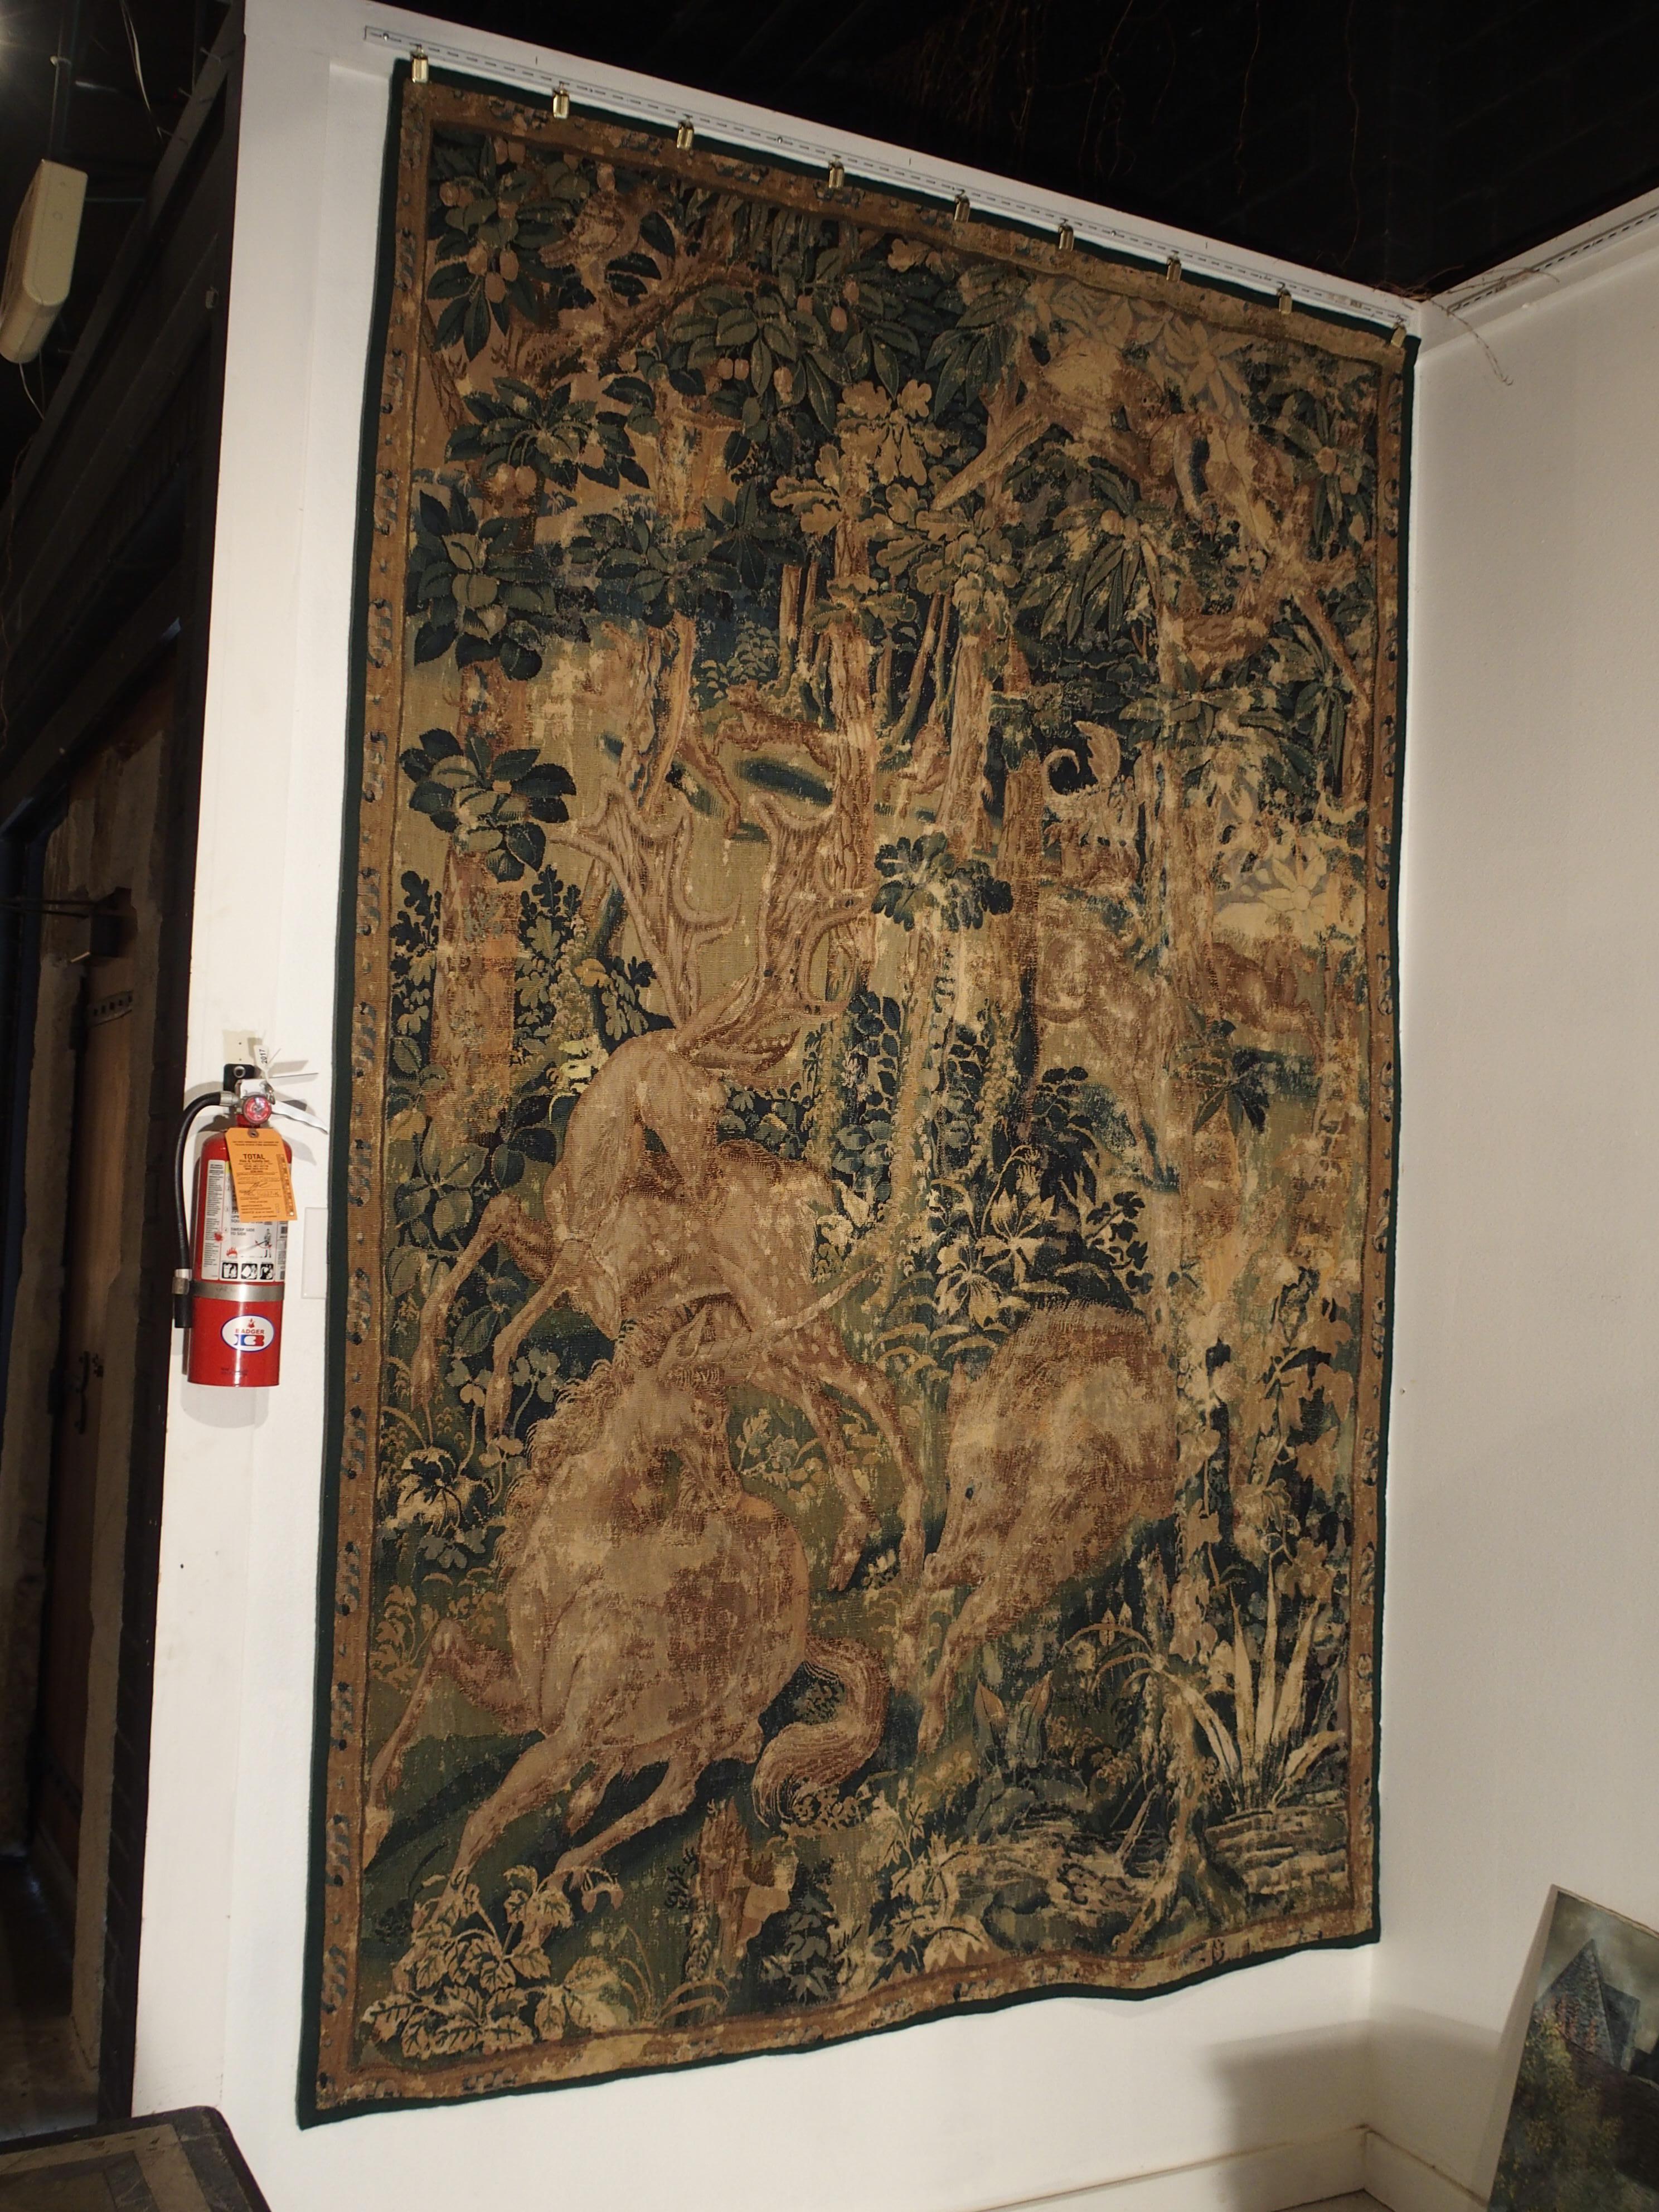 Wool Late 16th Century Flemish Game Park Tapestry with Unicorn, Stag, and Boar